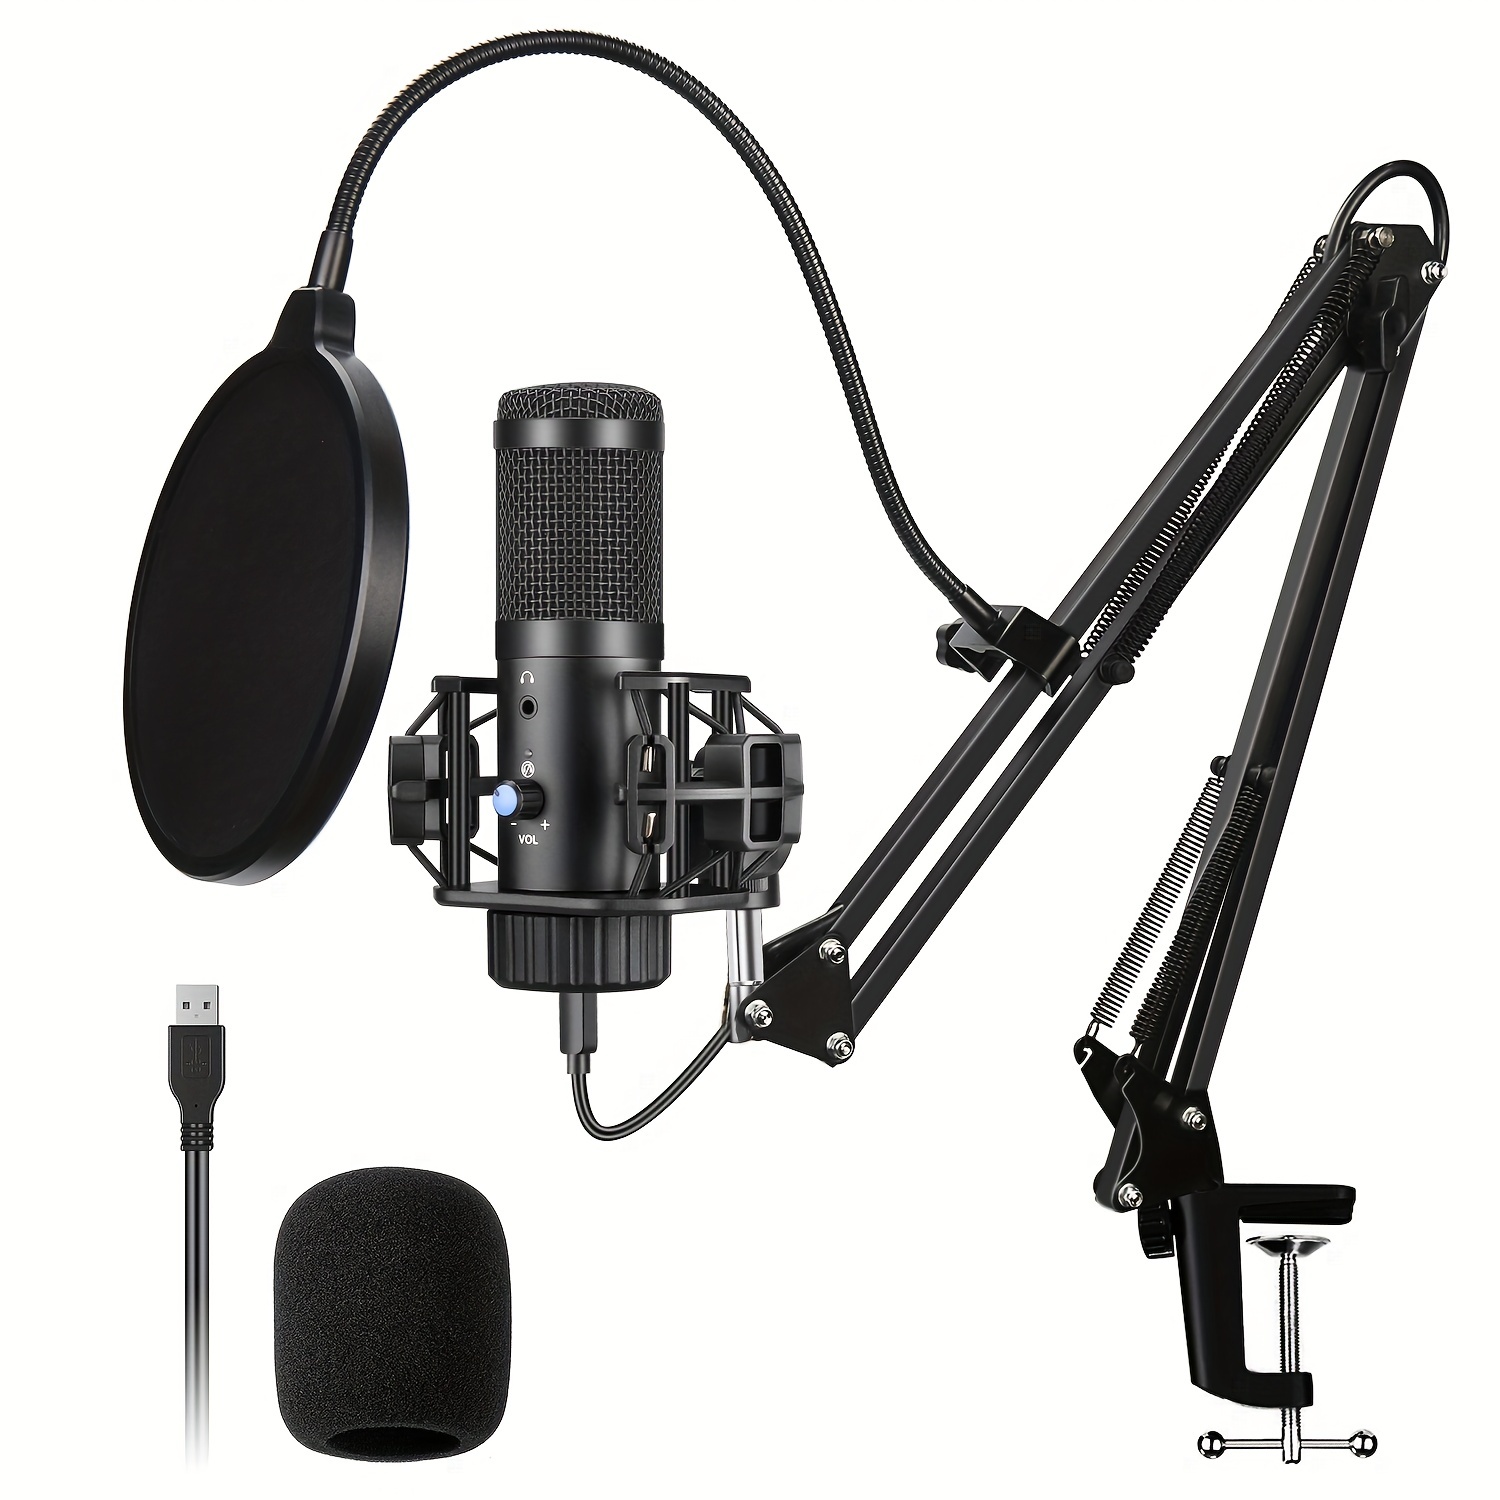 TONOR USB Microphone Kit, Recording Microphone 192kHz/24 Bit Plug and Play  Condenser Computer Microphone for Podcast, Games,  Videos